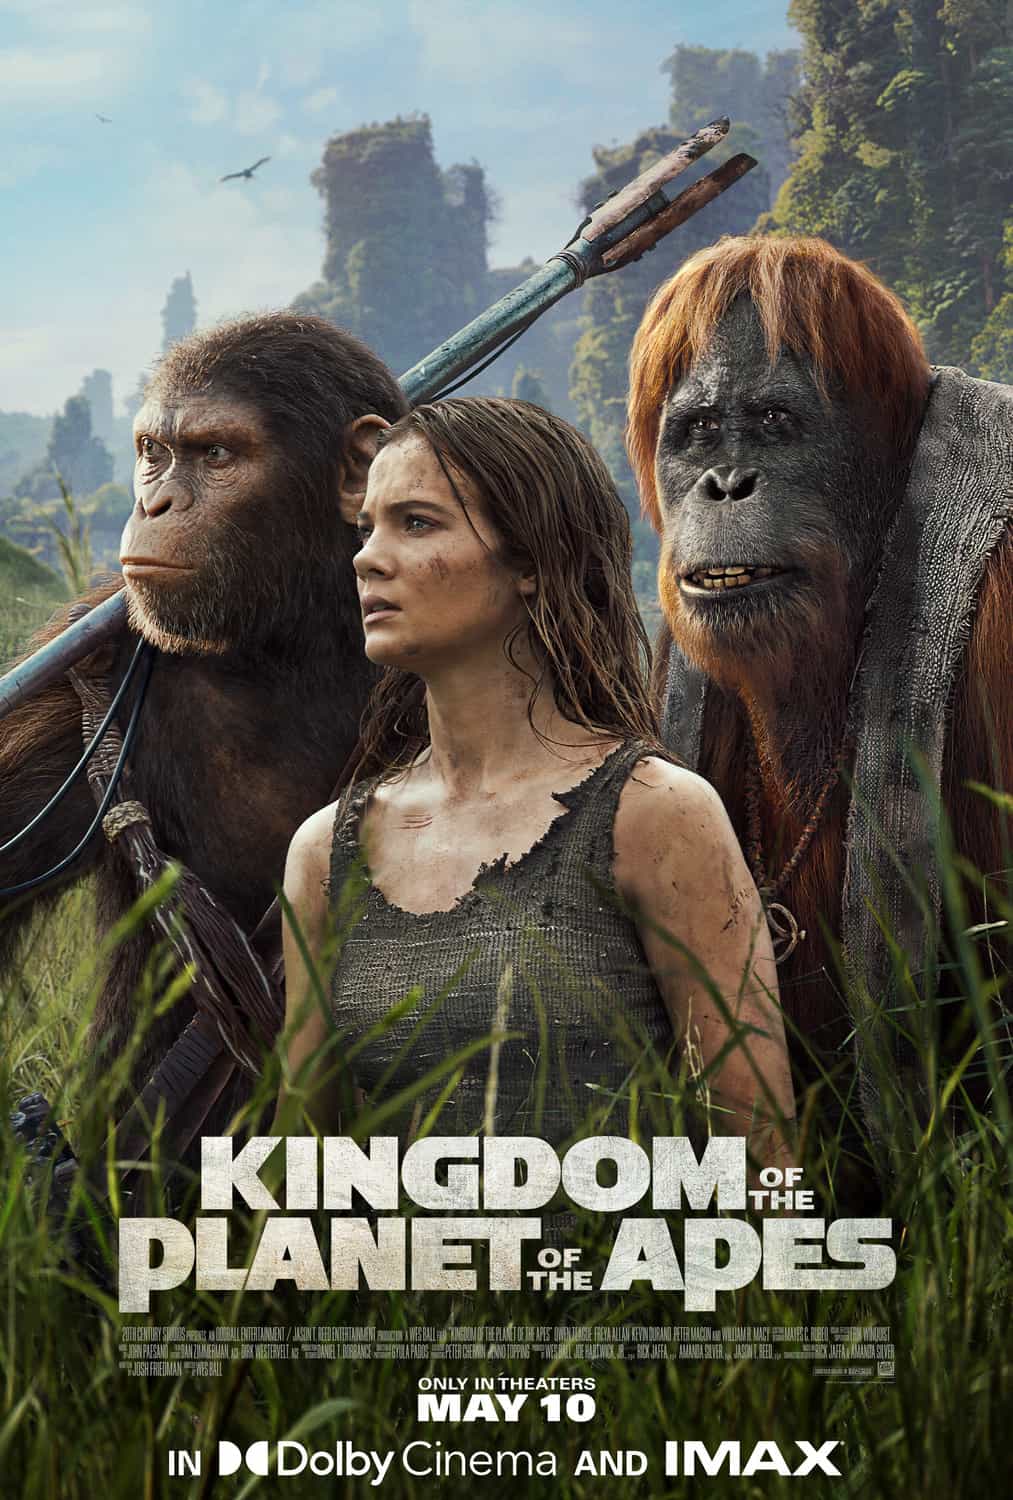 Check out the new trailer and poster for upcoming movie Kingdom of the Planet of the Apes which stars Freya Allan and Kevin Durand - movie UK release date 24th May 2024 #kingdomoftheplanetoftheapes